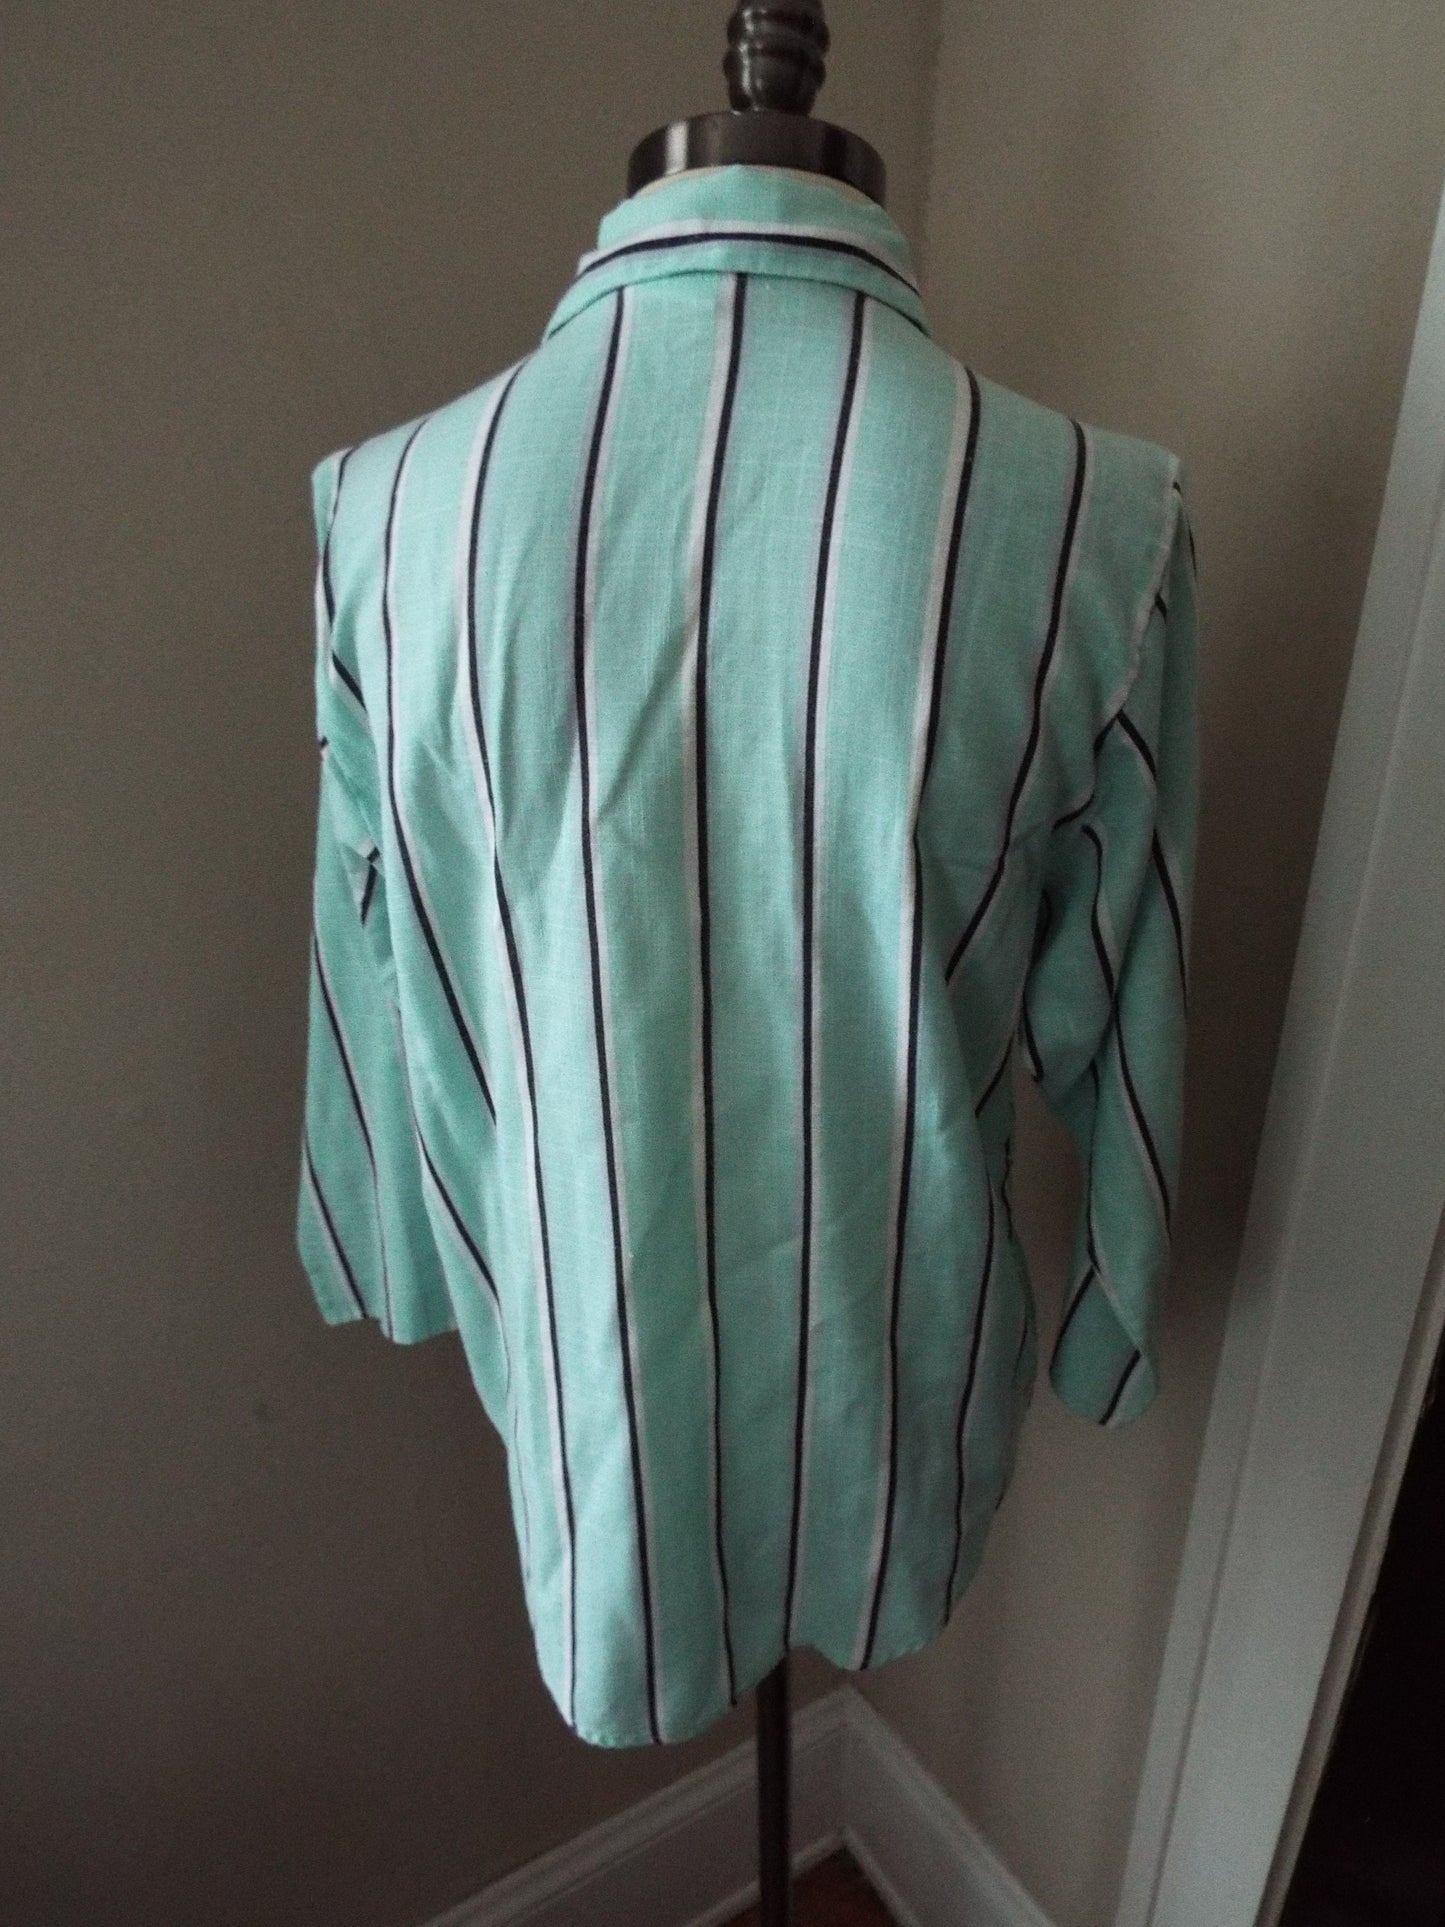 Vintage Long Sleeve Button Down Striped Blouse by Christina's